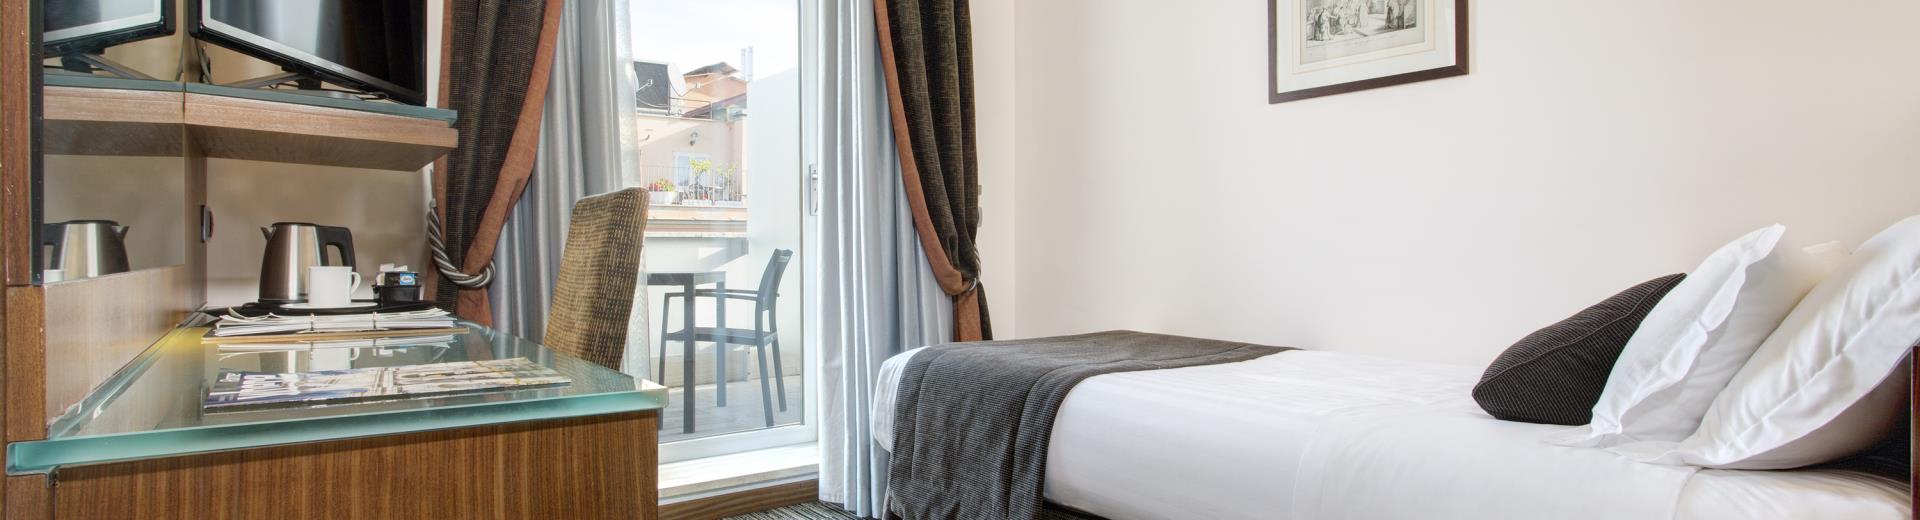 Camere Standard - Best Western Plus Hotel Universo Roma 4 stelle